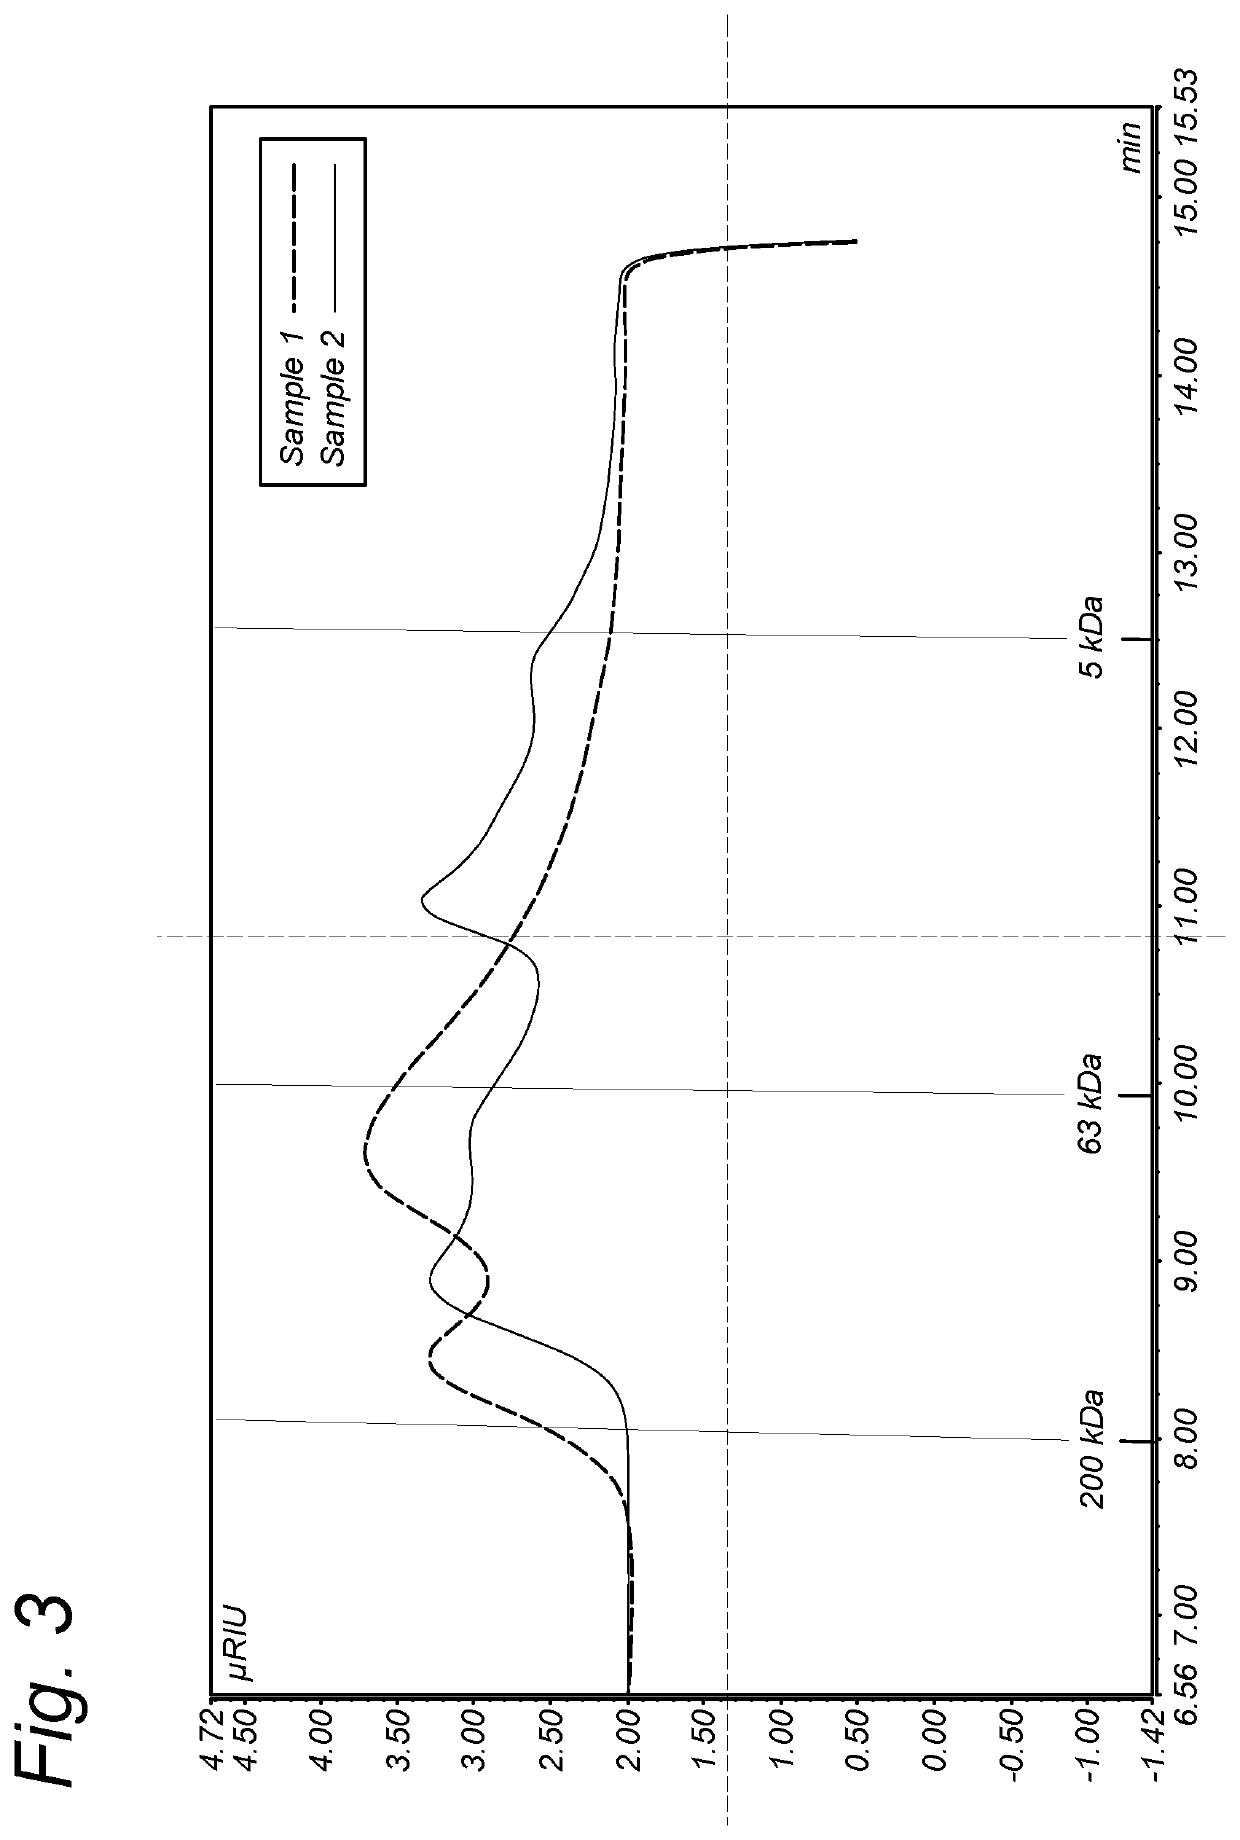 Enzymatically hydrolysed pectic polysaccharides for treating or preventing infections